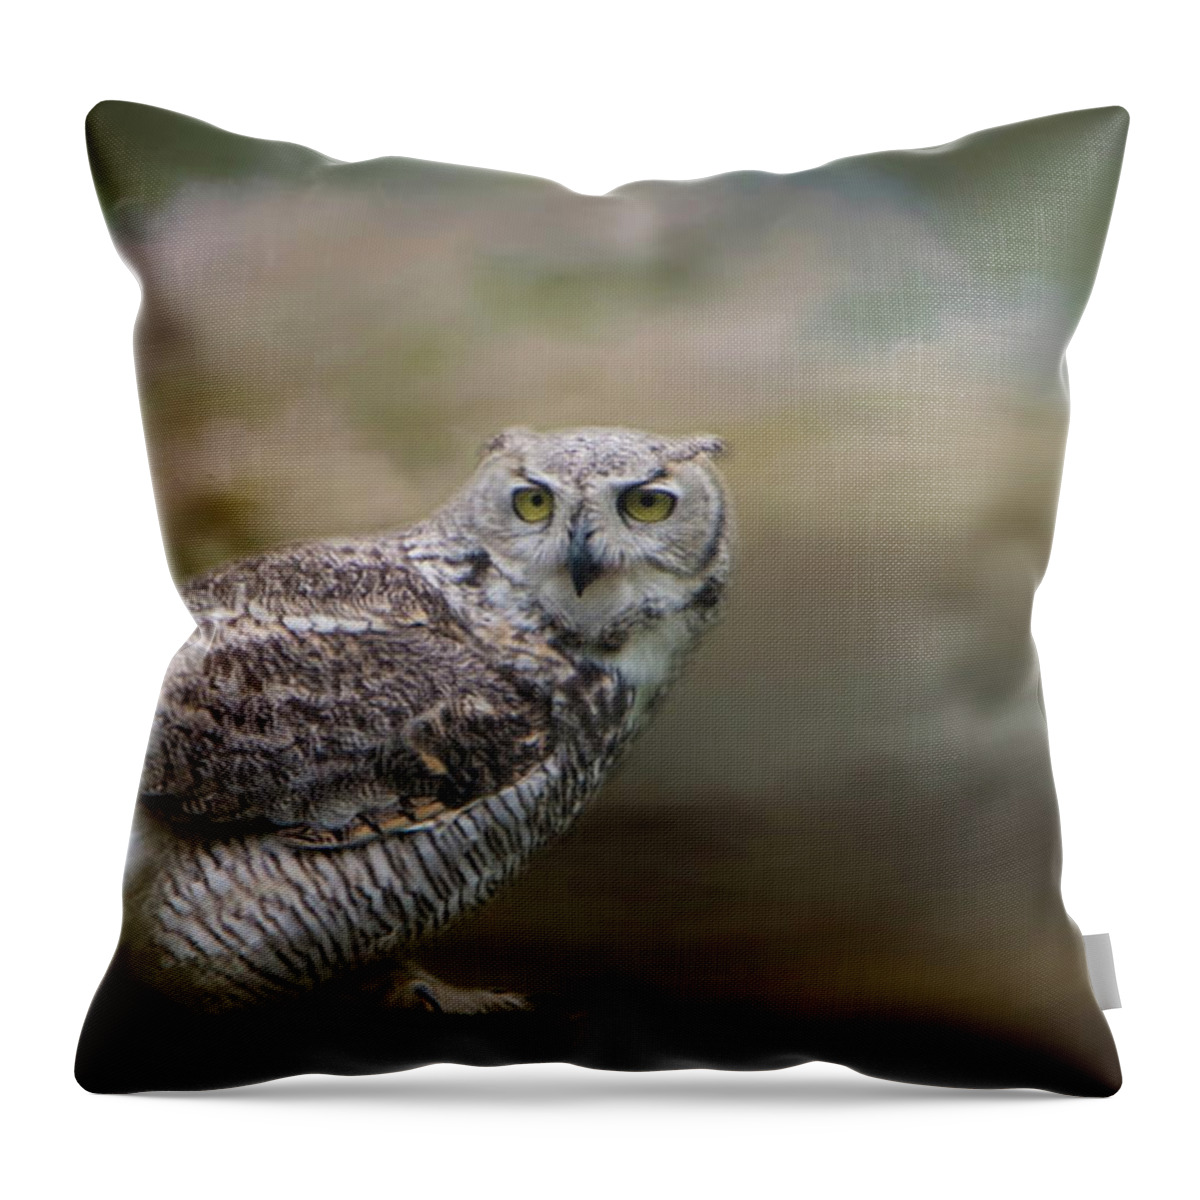 Owl Throw Pillow featuring the photograph Owl Eyes by Marilyn Wilson